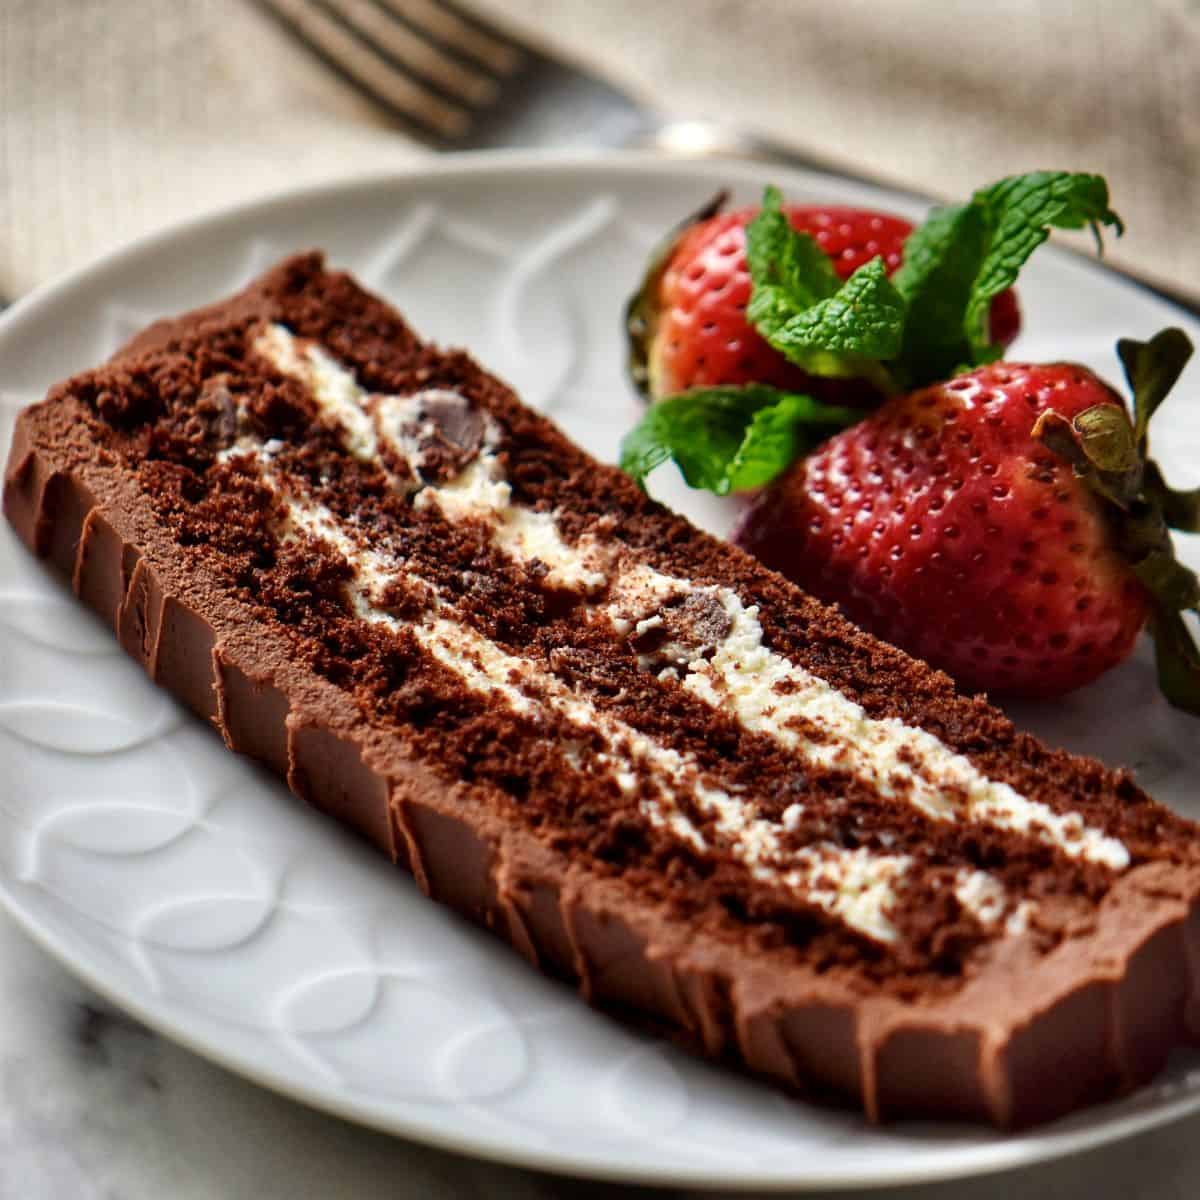 A slice of layered Chocolate Cake with ricotta cheese filling with strawberries on a white plate.